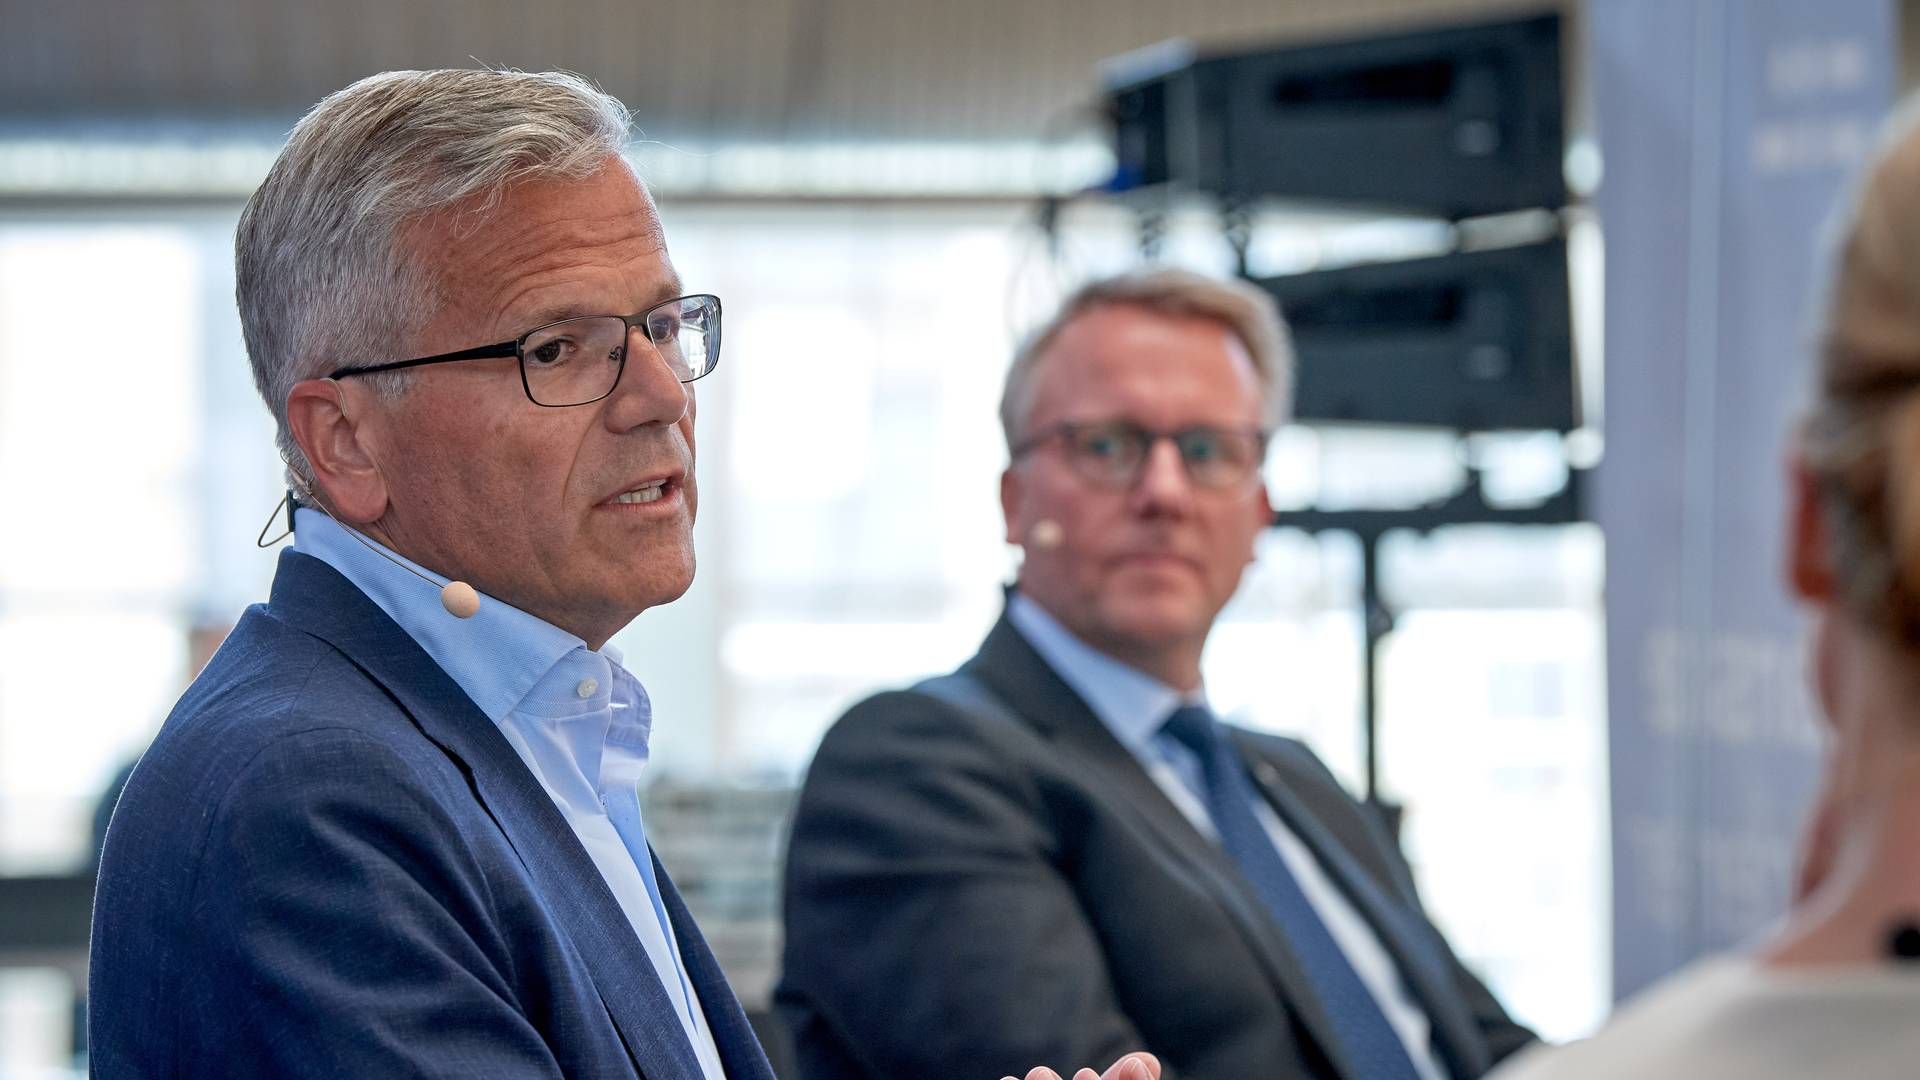 ”I believe that what we see in the US and also a bit in Europe in different ways is that industrial policy from the side of the government is getting increasingly important," said Maersk CEO Vincent Clerc (left) in a discussion with Danish business minister Morten Bødskov on Danish Shipping's annual day. | Photo: Carsten Lundager